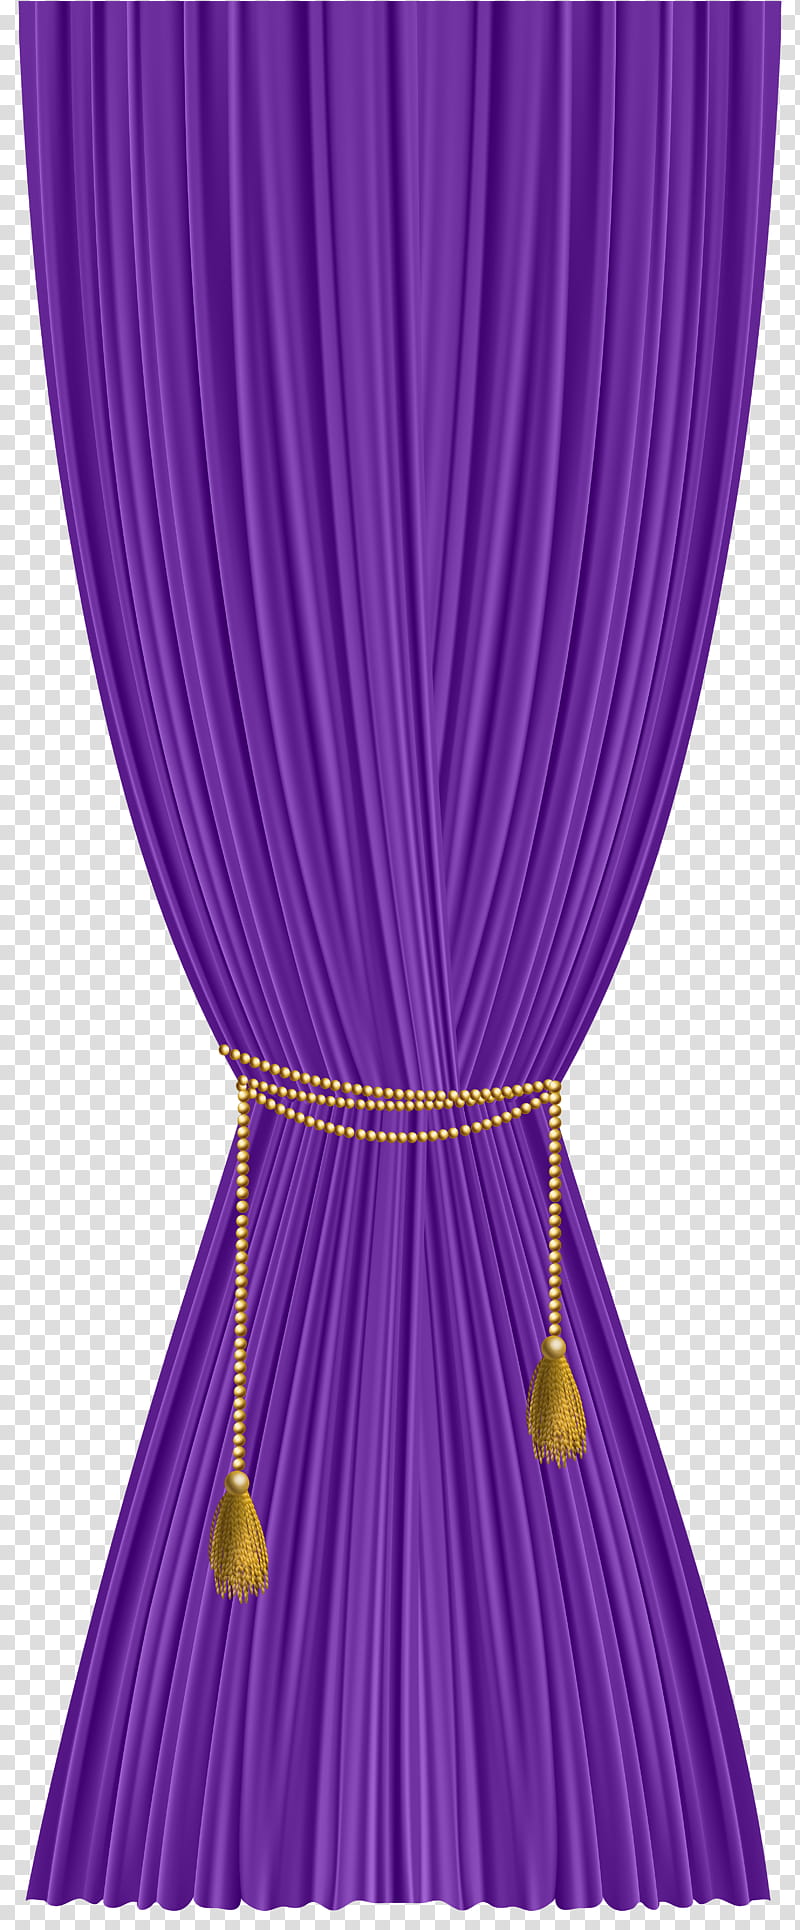 Lavender, Curtain, Front Curtain, Theater Drapes And Stage Curtains, Violet, Purple, Textile, Magenta transparent background PNG clipart